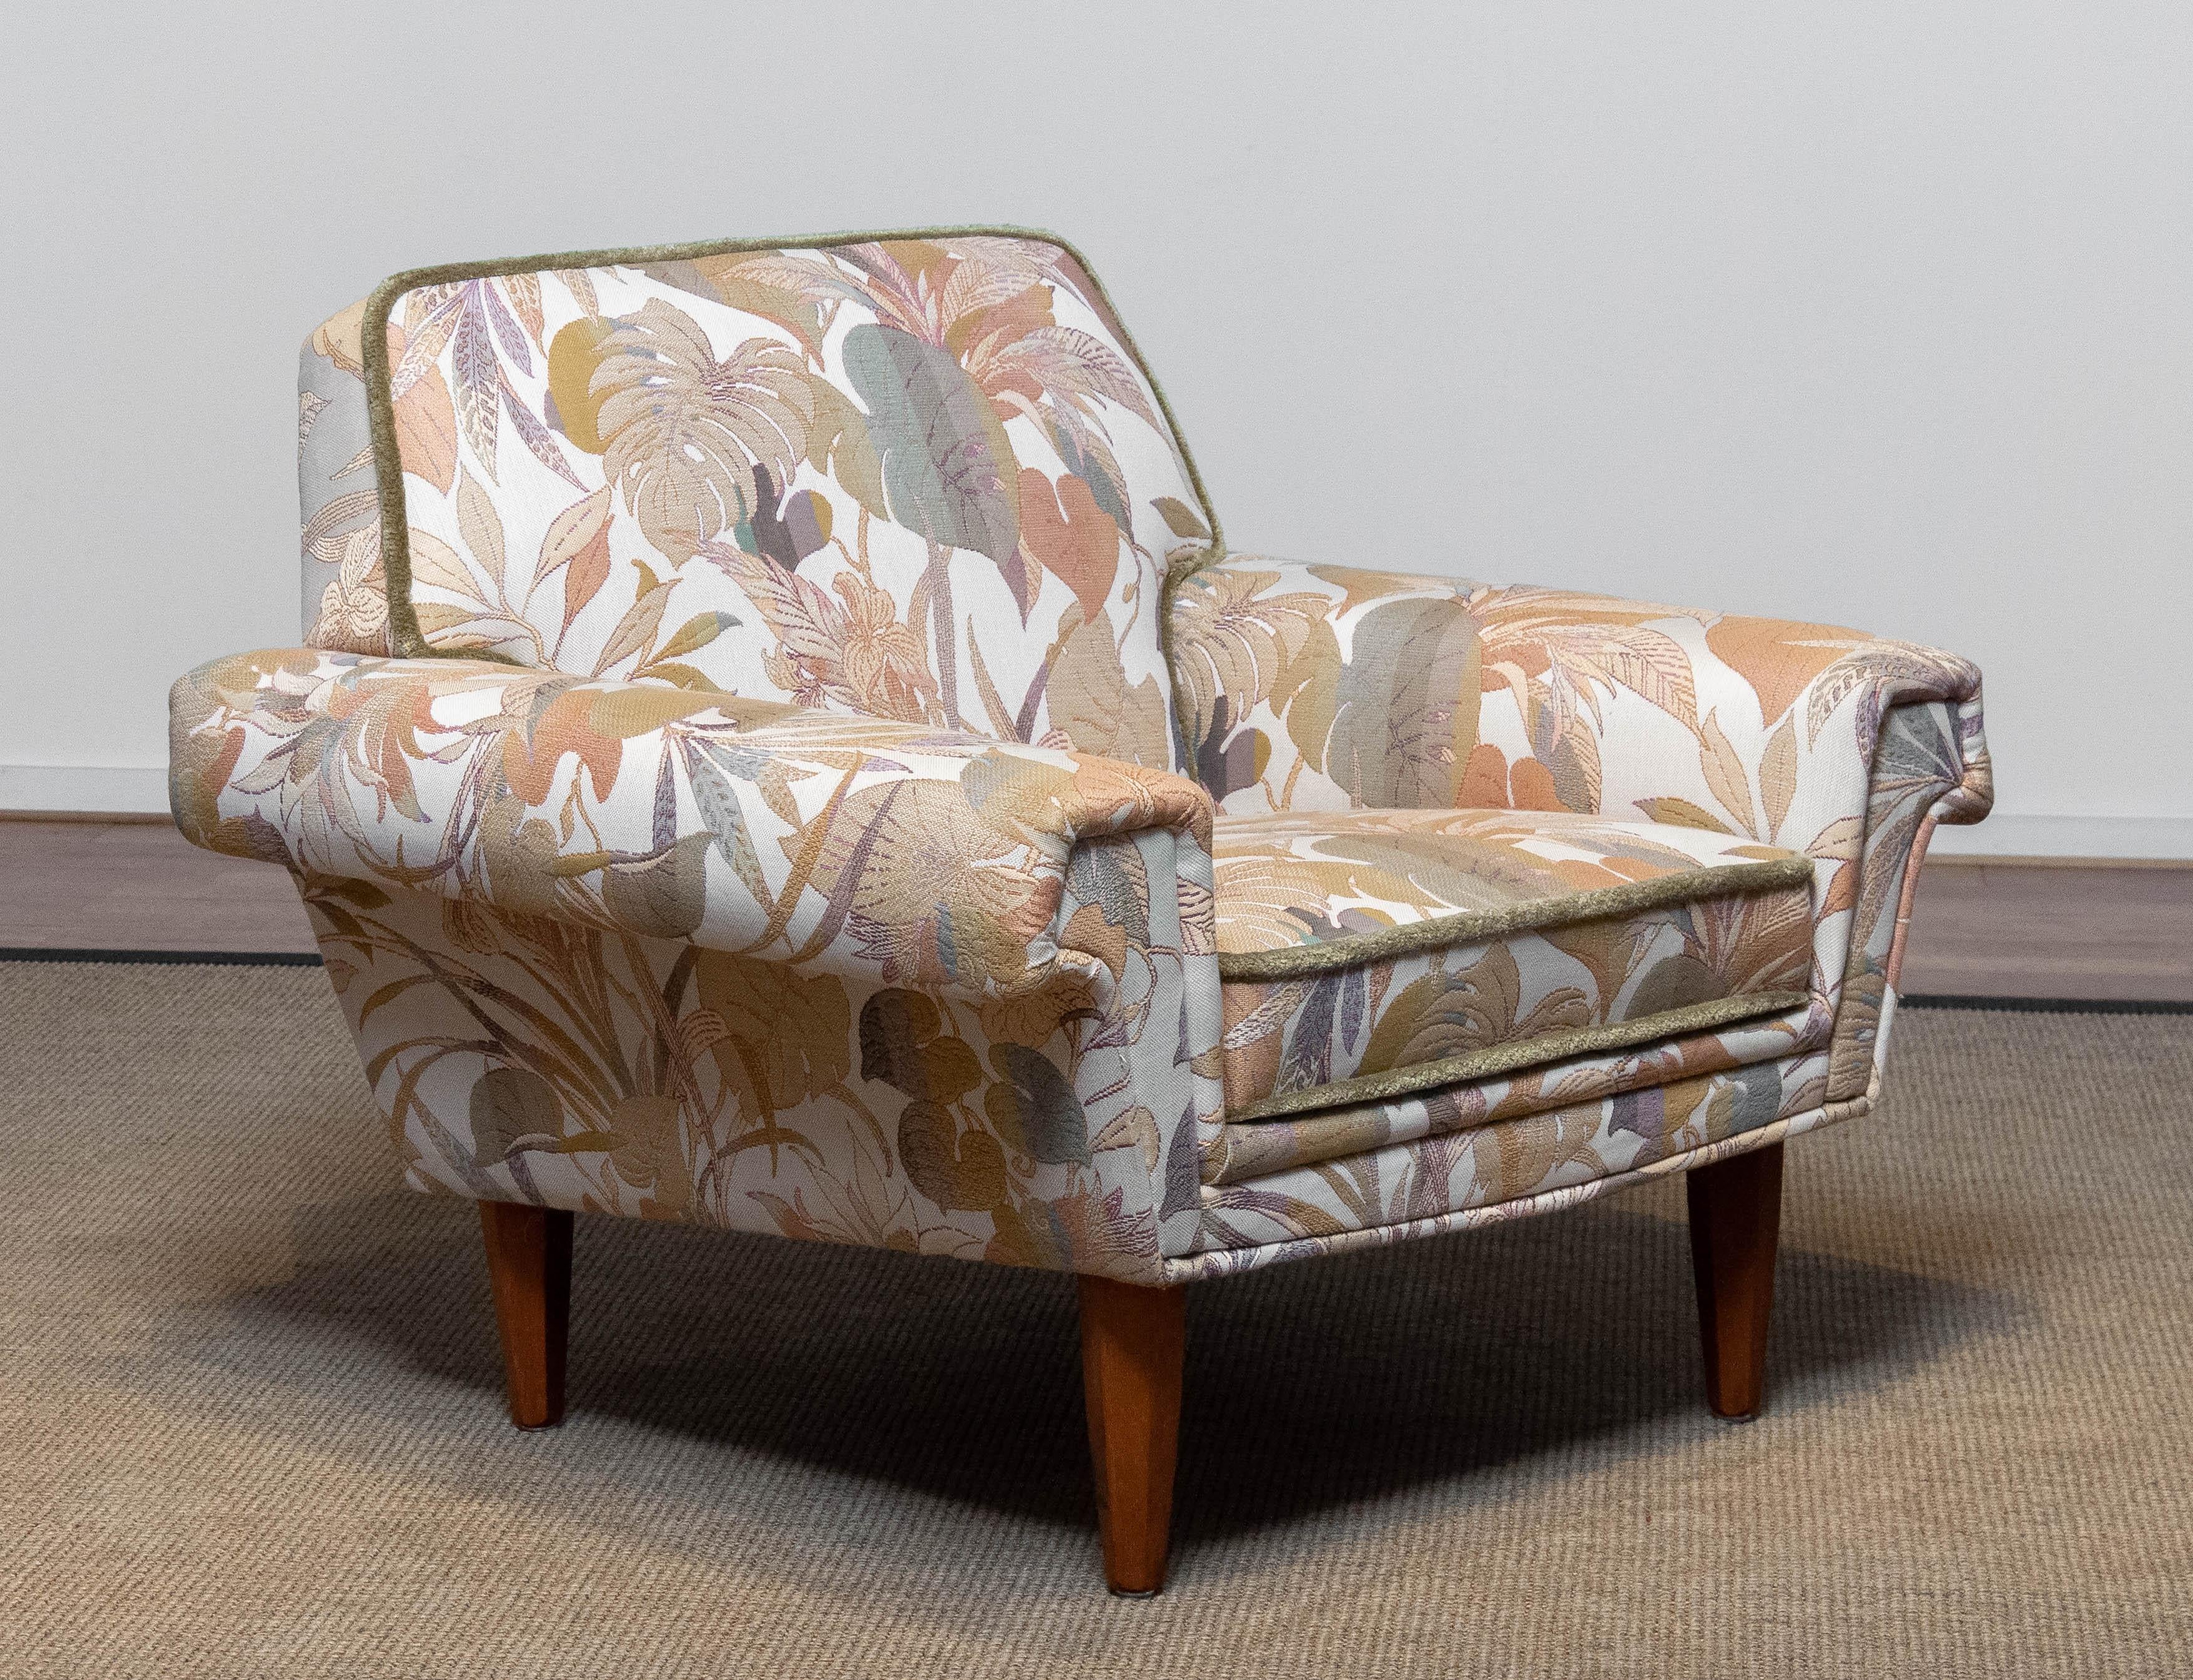 Danish Low Back Lounge Chair Upholstered Floral Jacquard Fabric from the 1970's For Sale 3